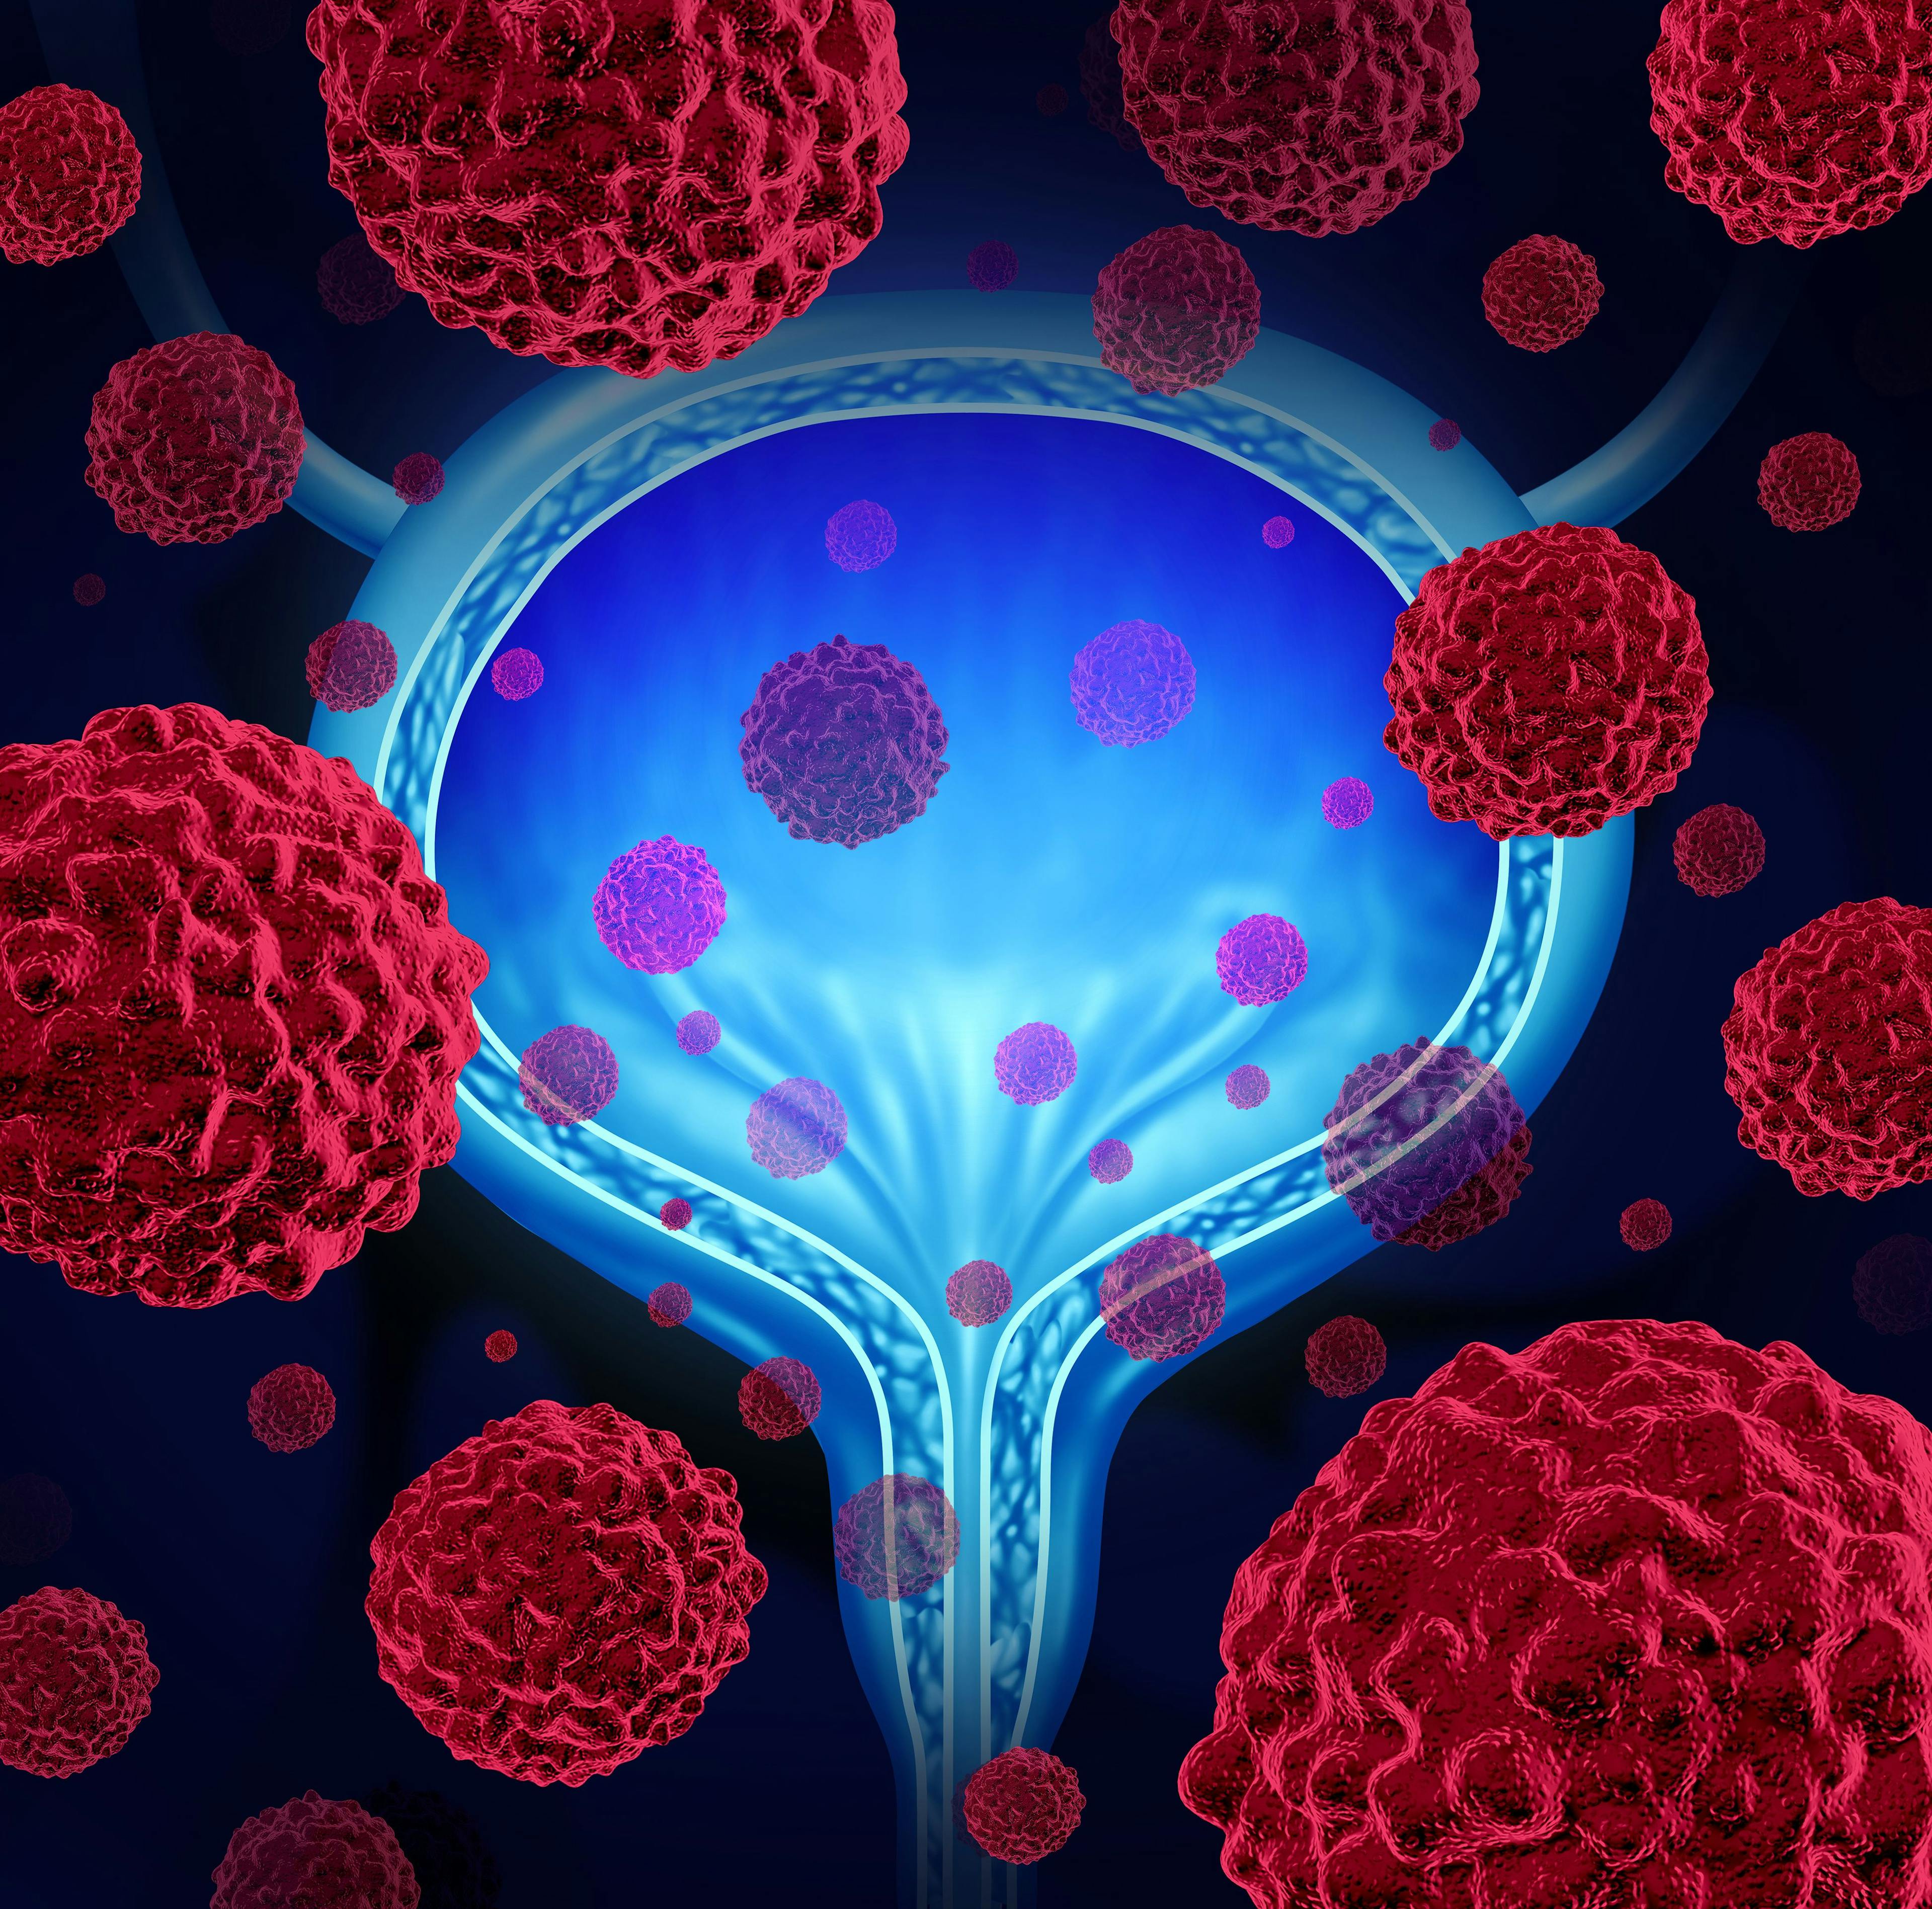  CG0070 Plus Pembrolizumab Shows Preliminary Efficacy in Non-Muscle Invasive Bladder Cancer